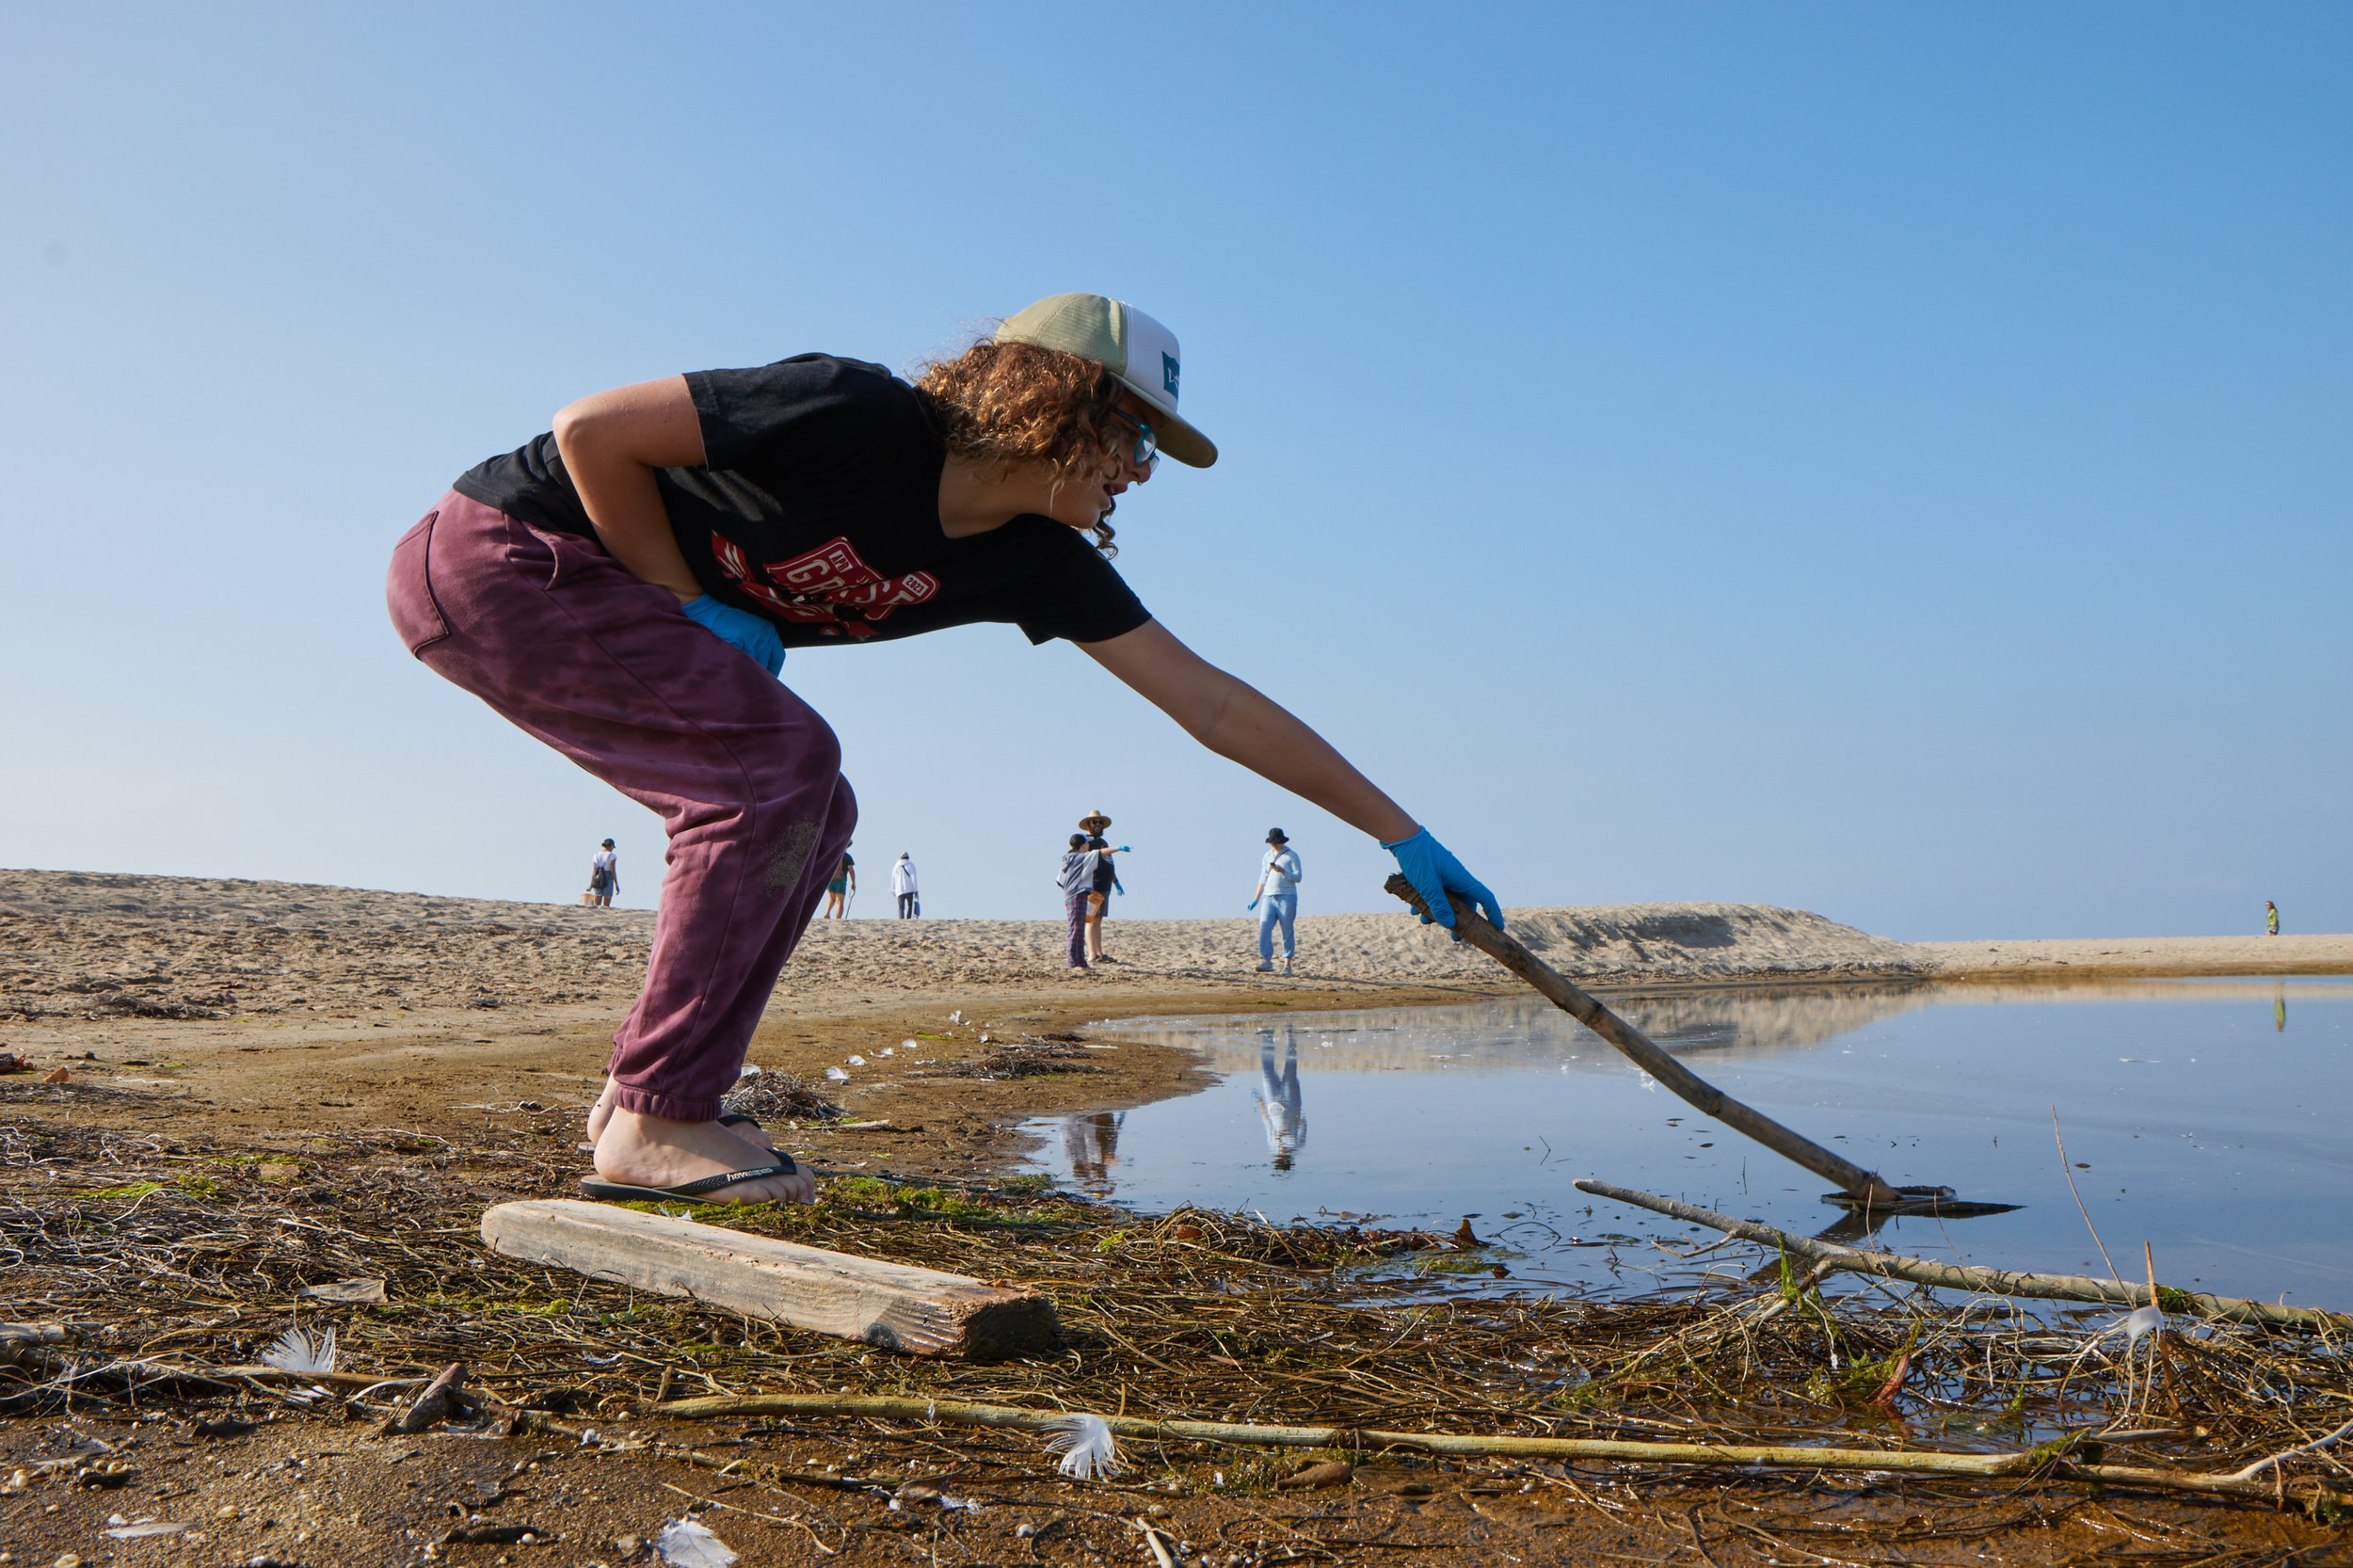  Volunteer Xavier attempts to pick up a piece of trash with a stick in a lagoon during a coastal beach cleanup organized by Santa Monica College Sustainability Center at The Inkwell, Santa Monica, Calif., on Sept. 23, 2023. The heavily polluted lagoo